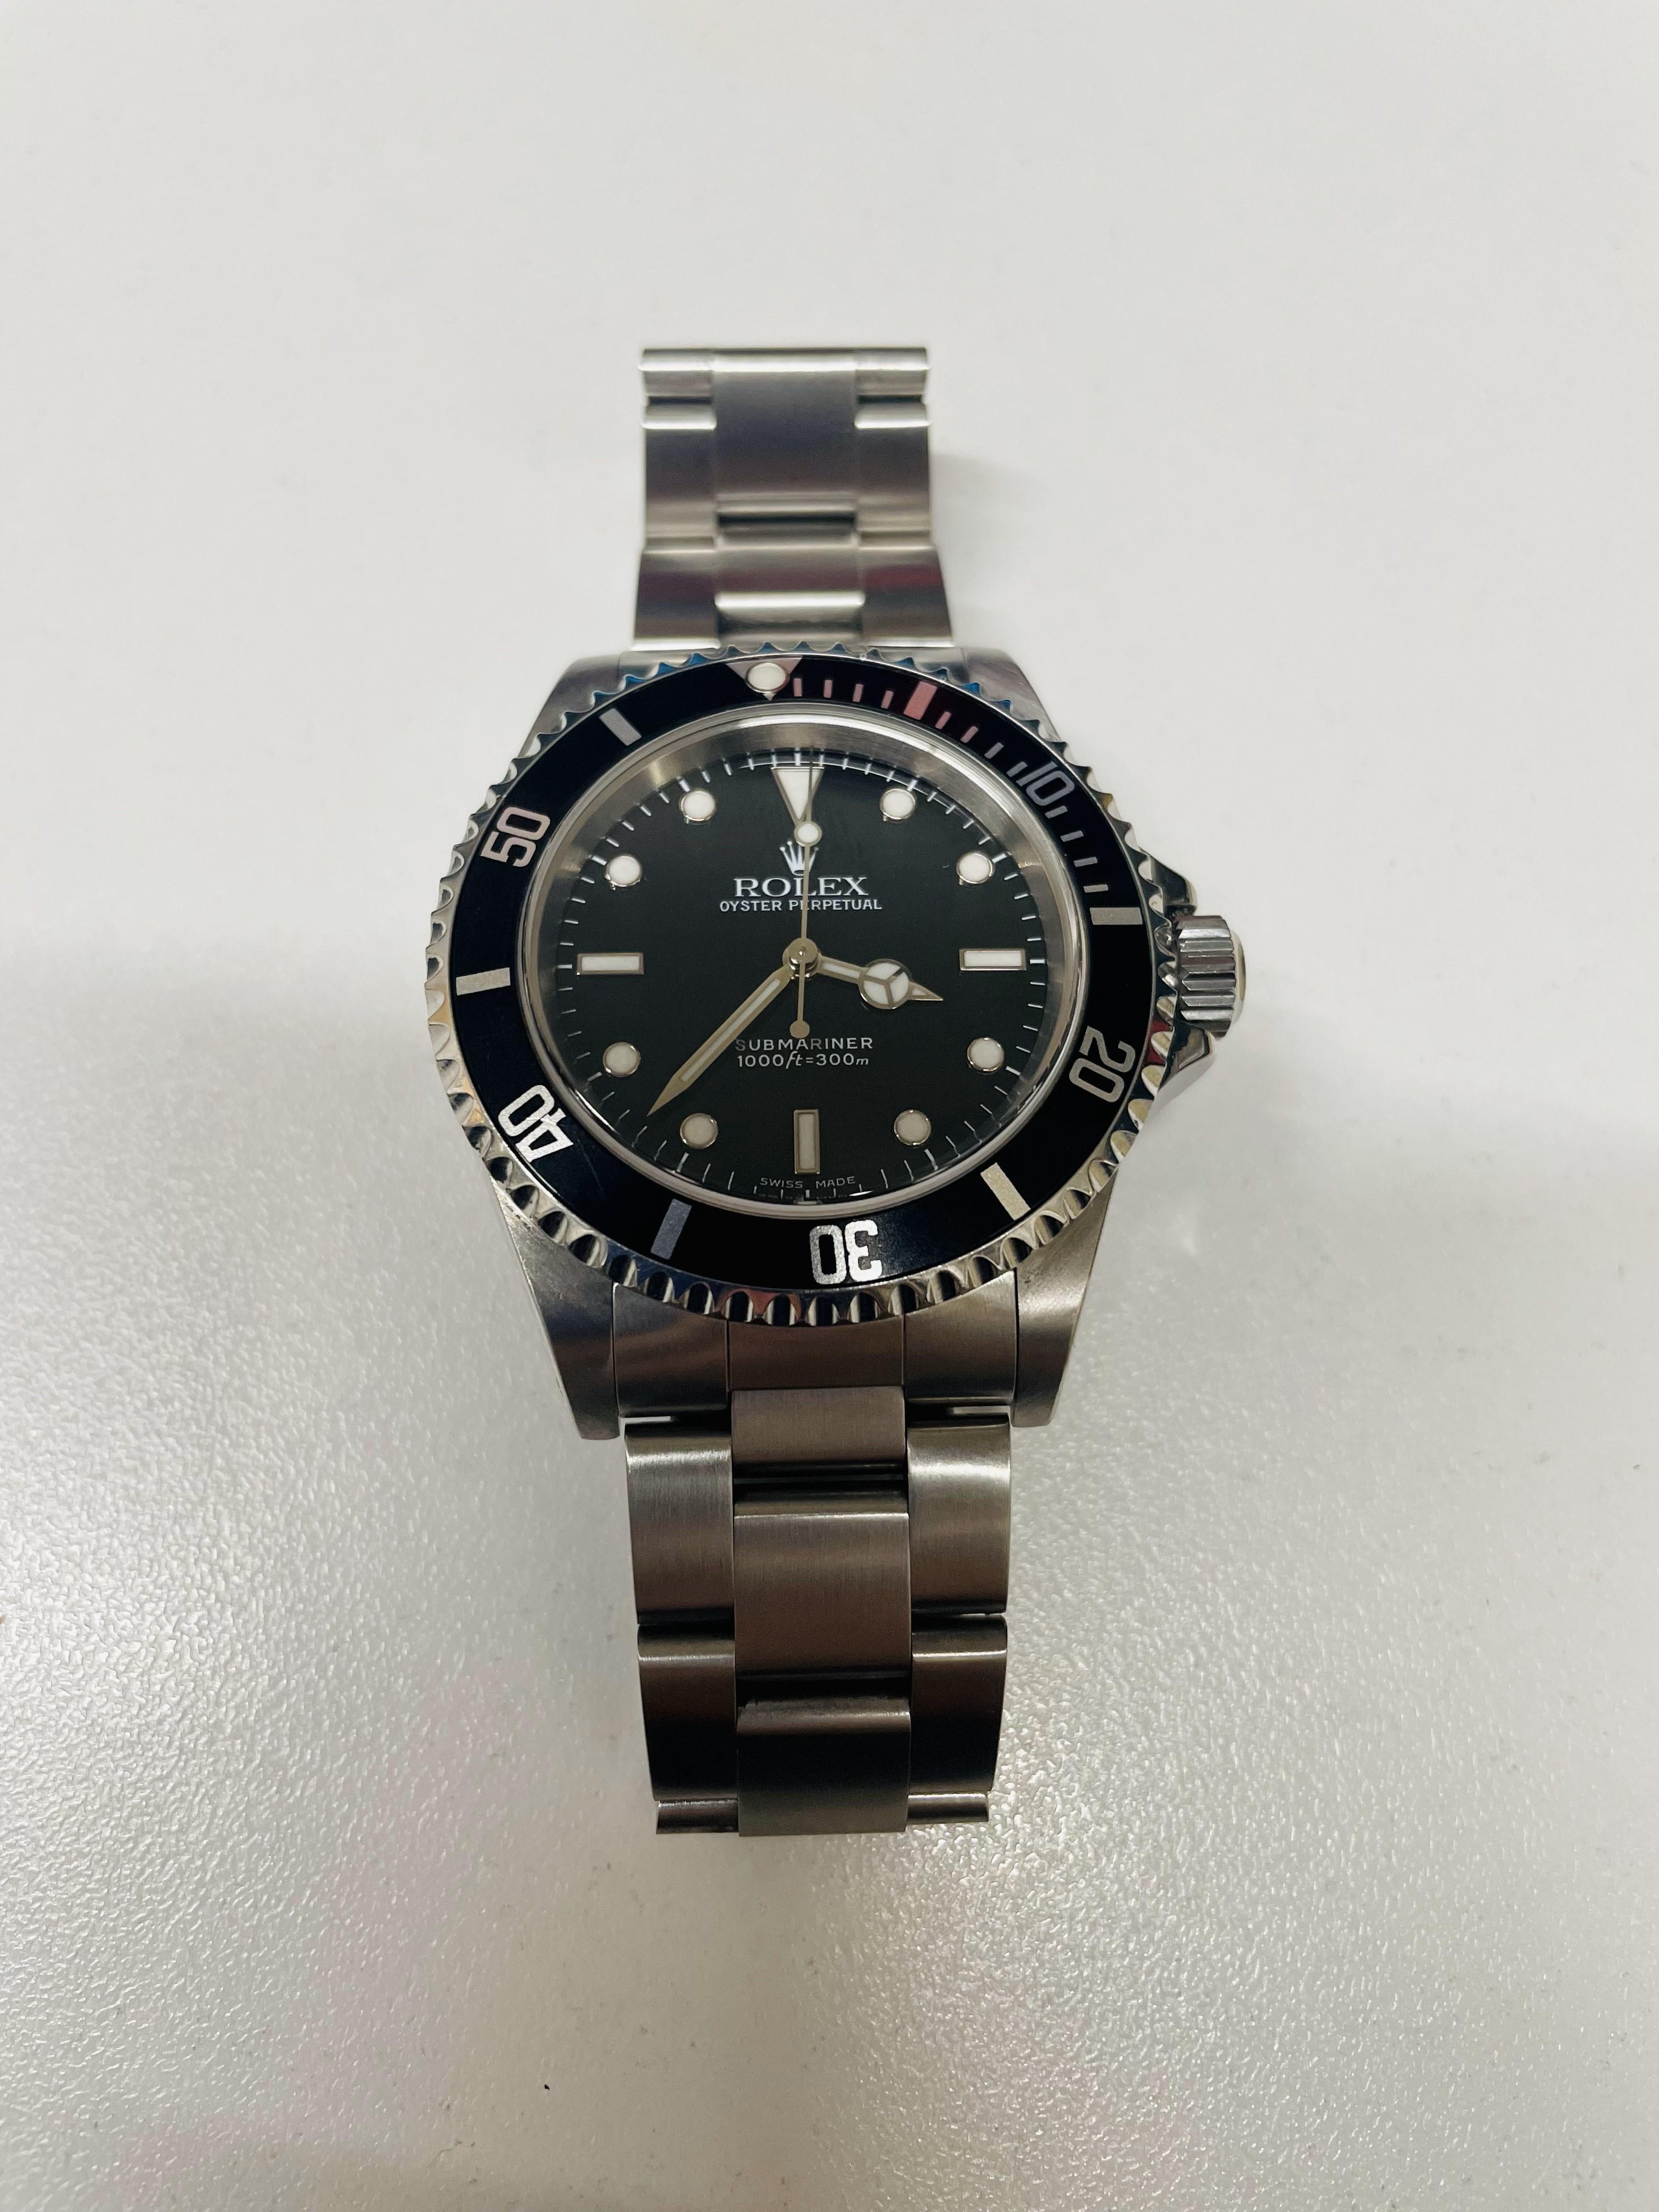 Rolex Men's Submariner Stainless Steel w/ Black Dial Oyster Perpetual In Excellent Condition For Sale In New York, NY